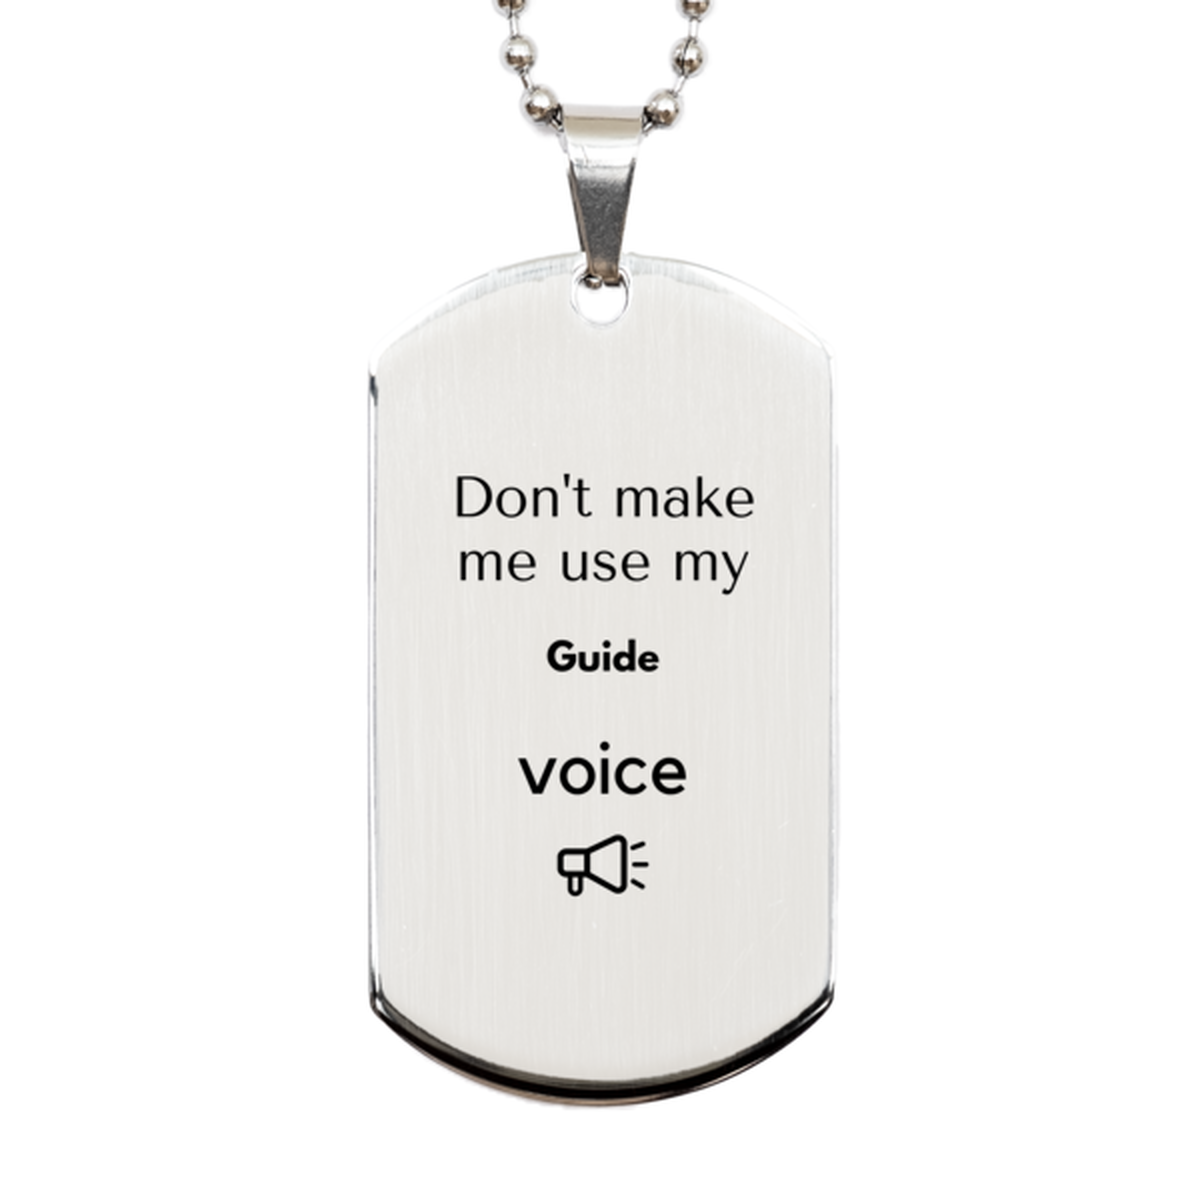 Don't make me use my Guide voice, Sarcasm Guide Gifts, Christmas Guide Silver Dog Tag Birthday Unique Gifts For Guide Coworkers, Men, Women, Colleague, Friends